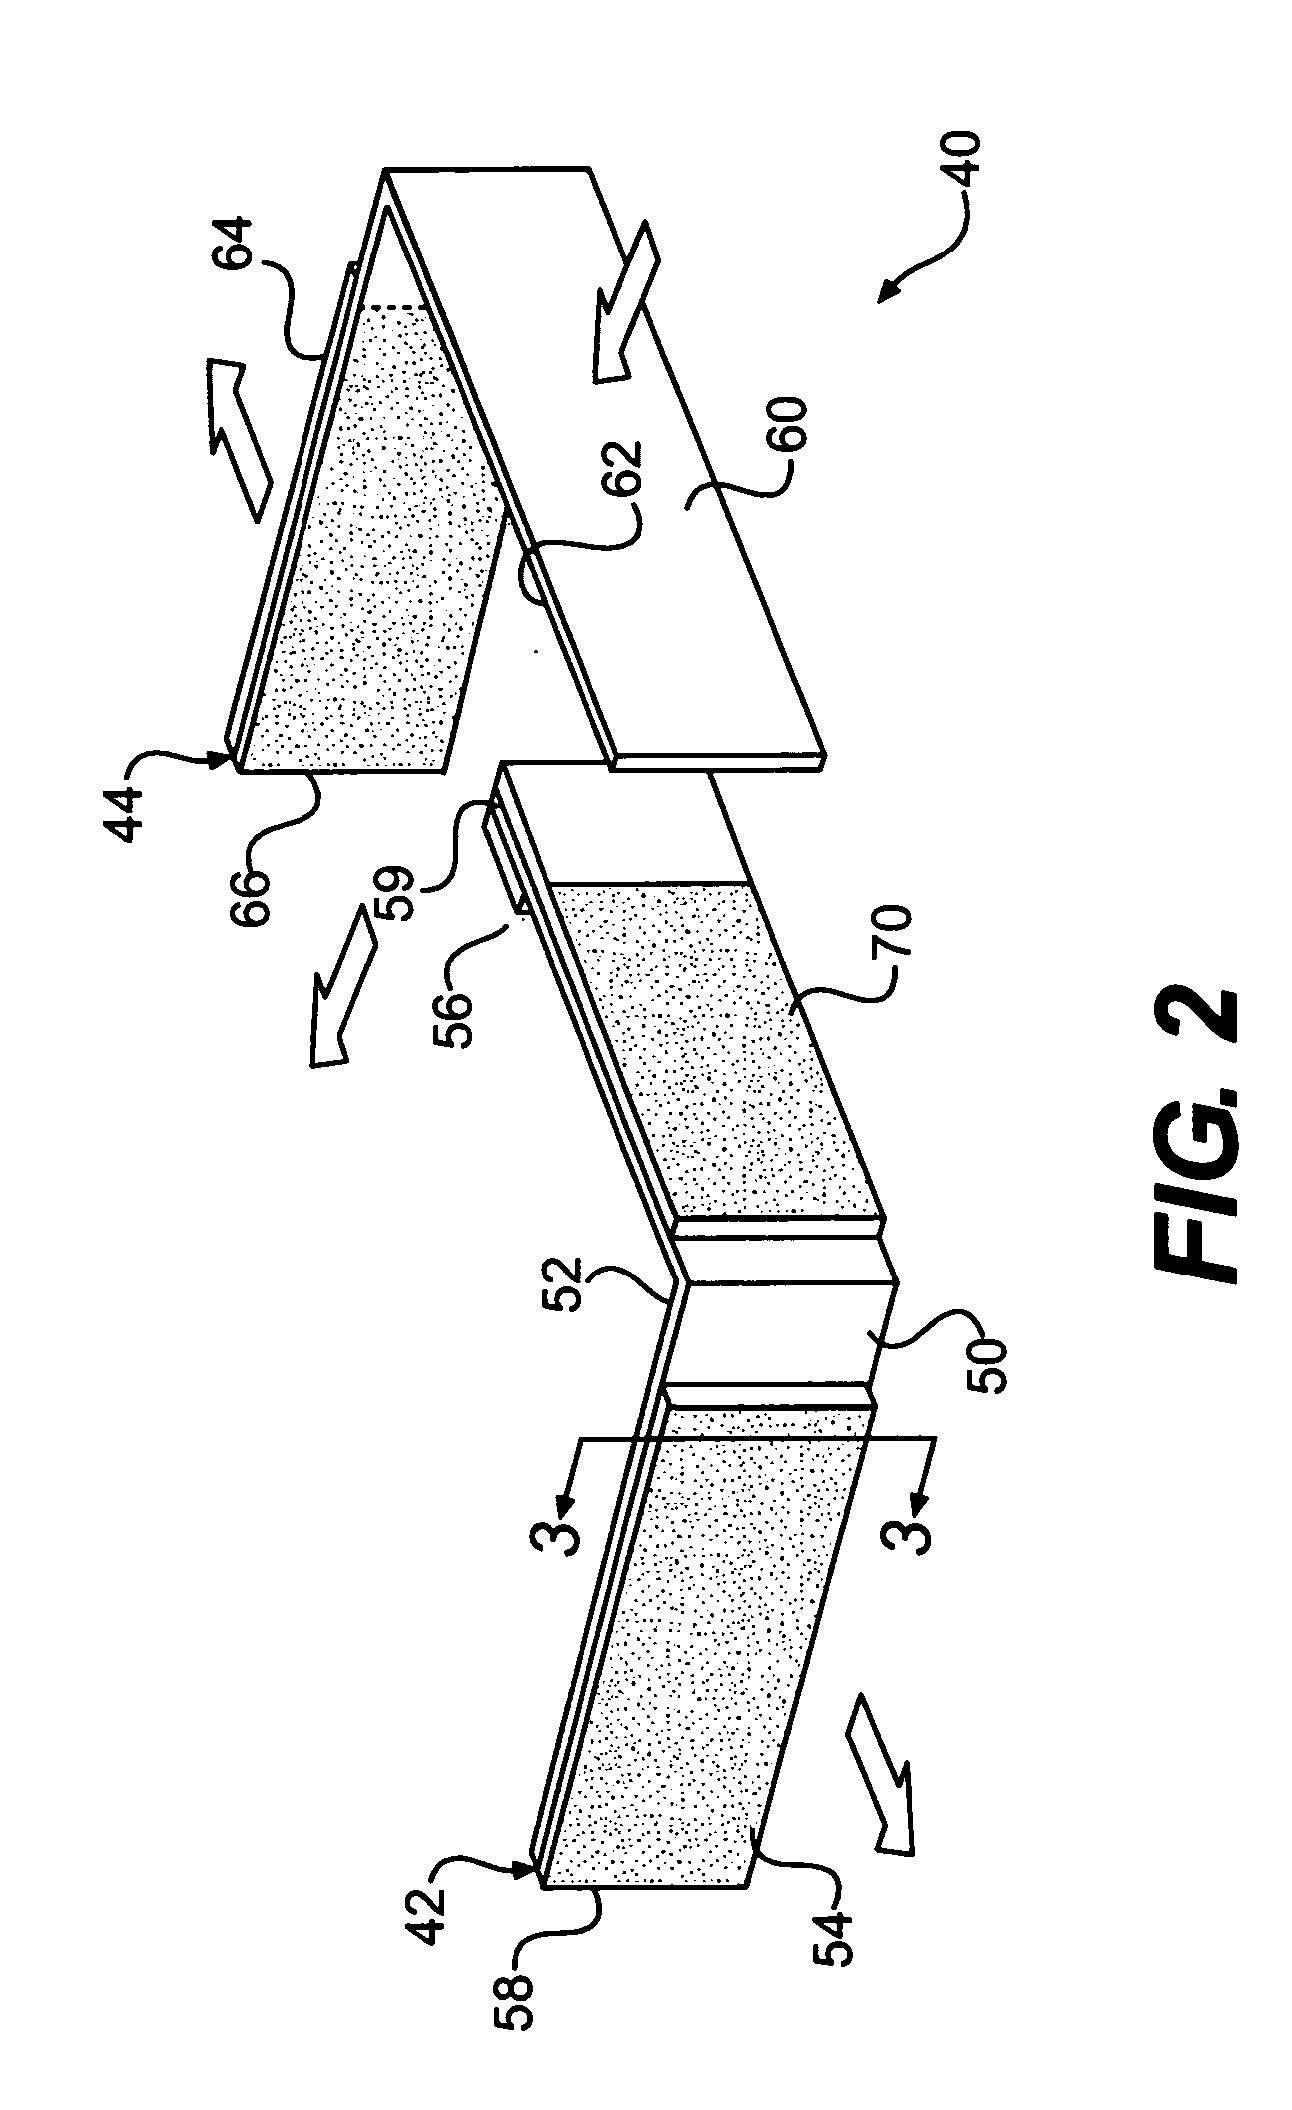 Overland cargo restraint system and method